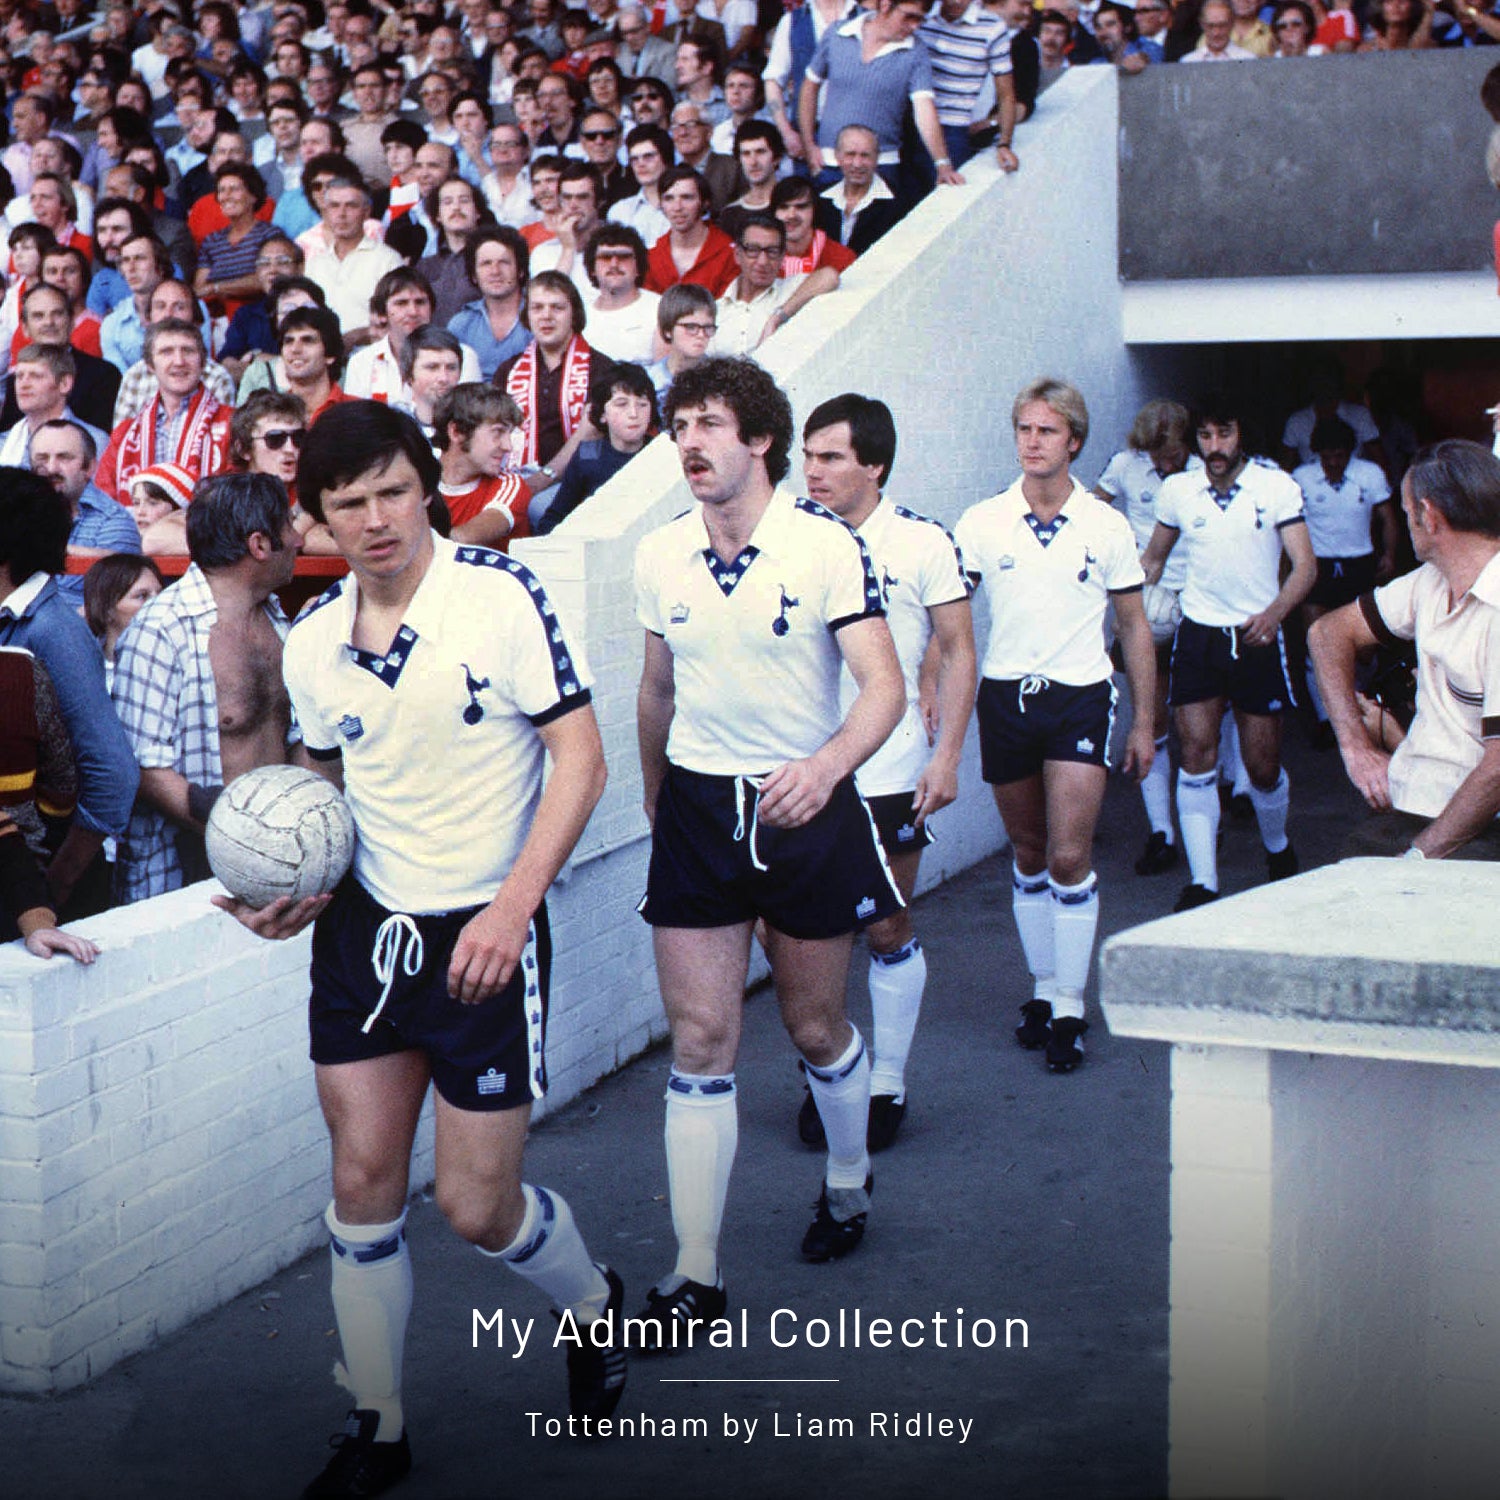 Tottenham walk out of the tunnel in Admiral kits in 1978-79